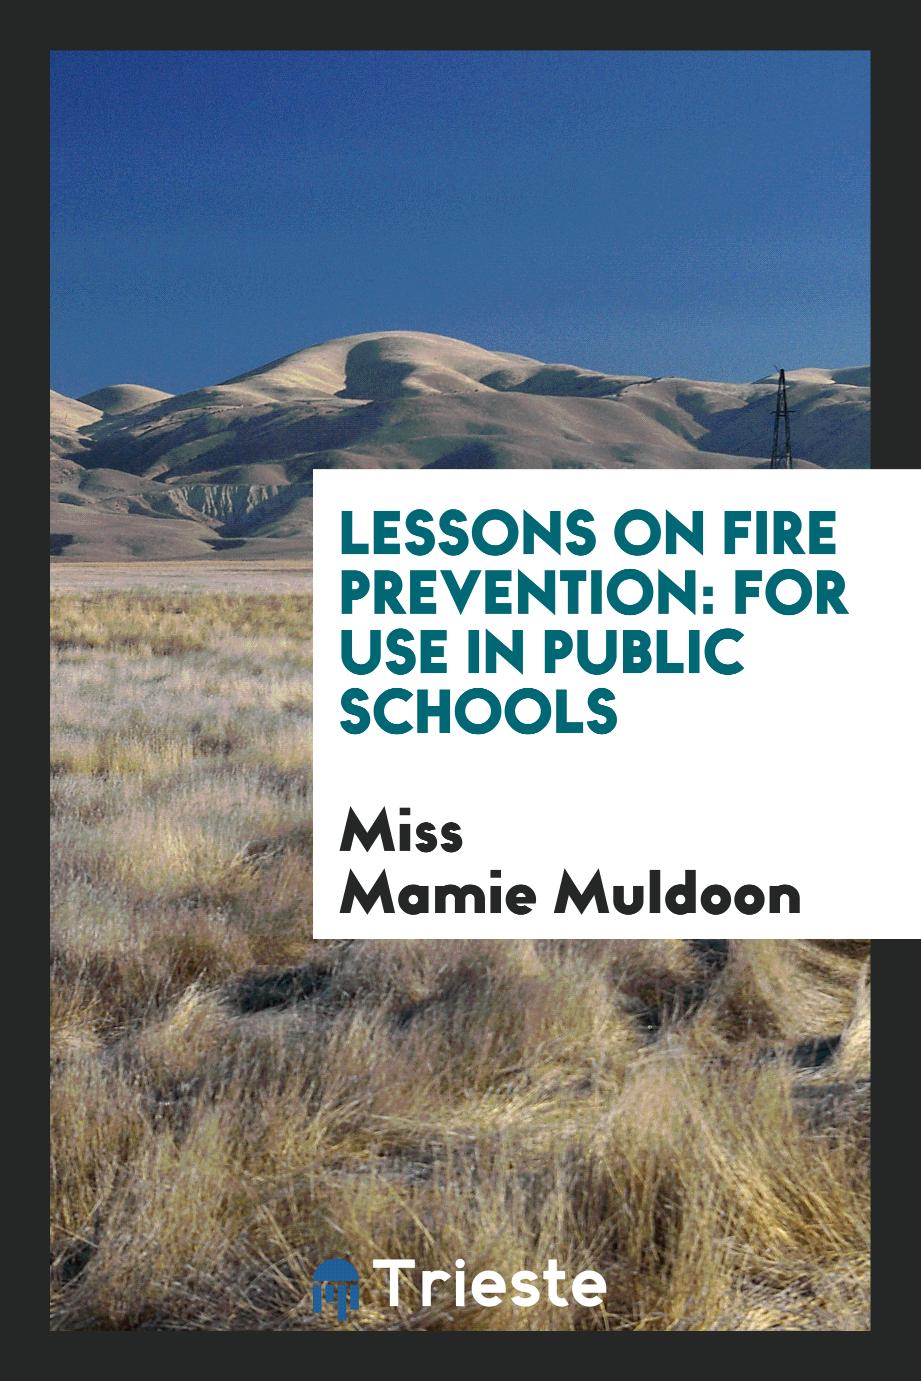 Lessons on Fire Prevention: For Use in Public Schools